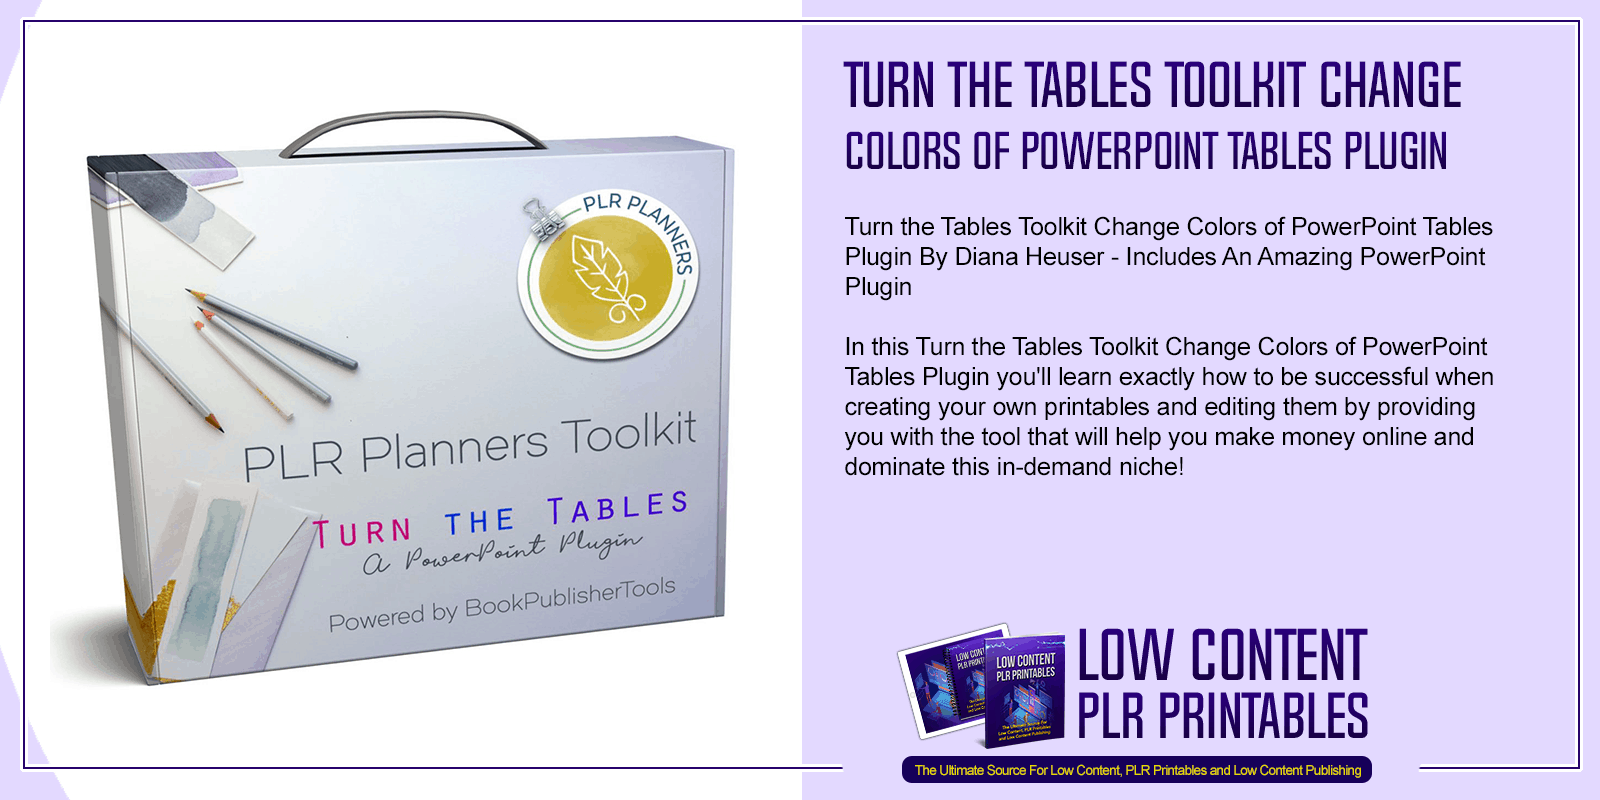 Turn the Tables Toolkit Change Colors of PowerPoint Tables Plugin